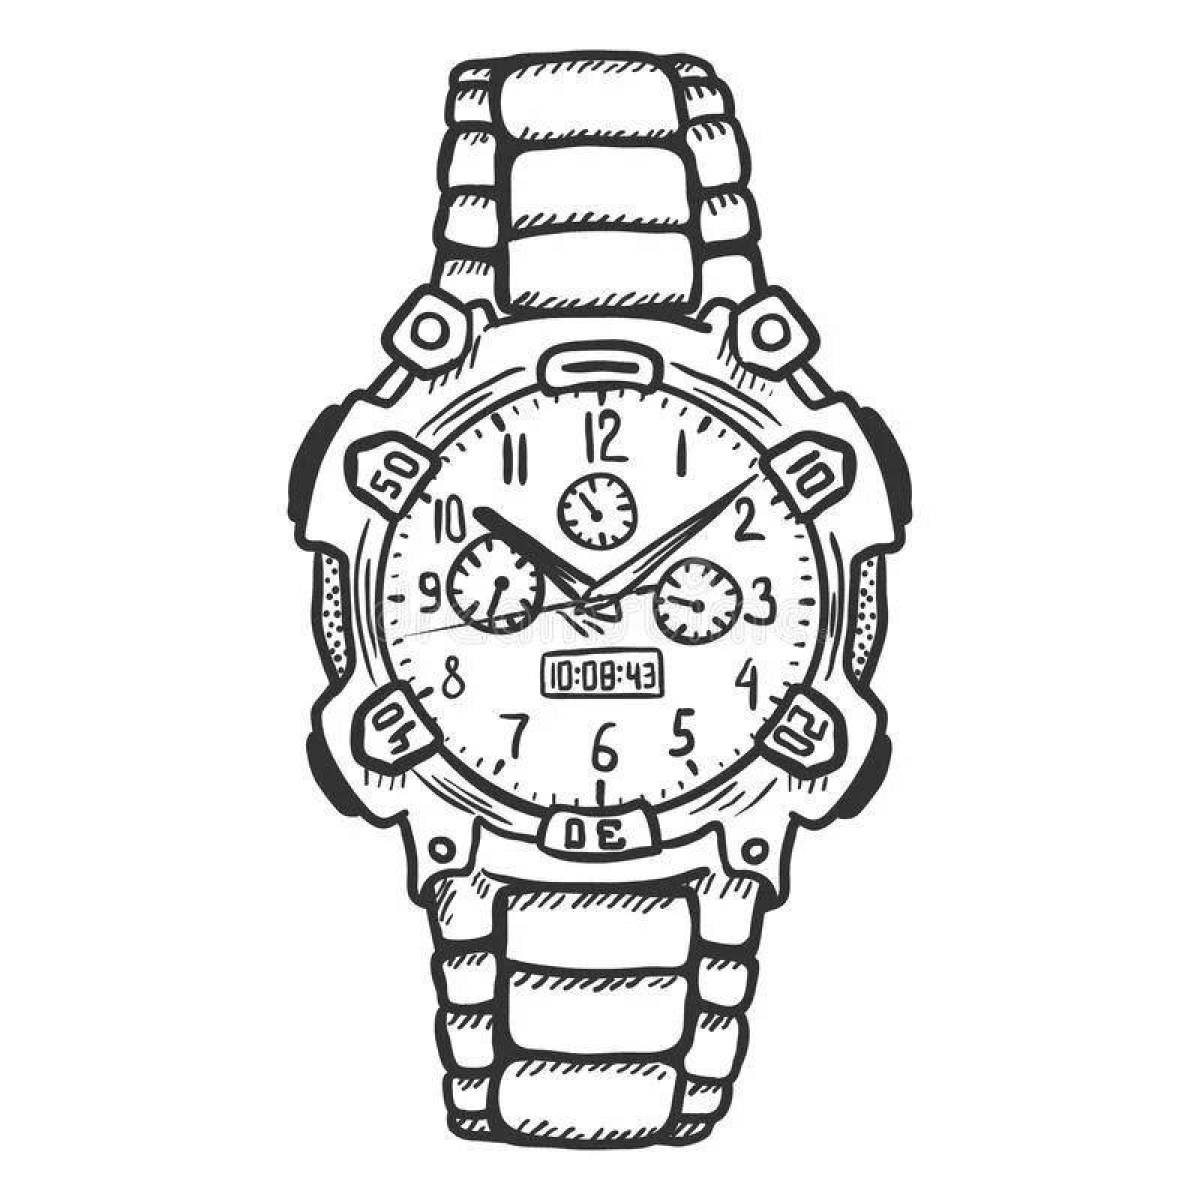 Awesome watch coloring pages